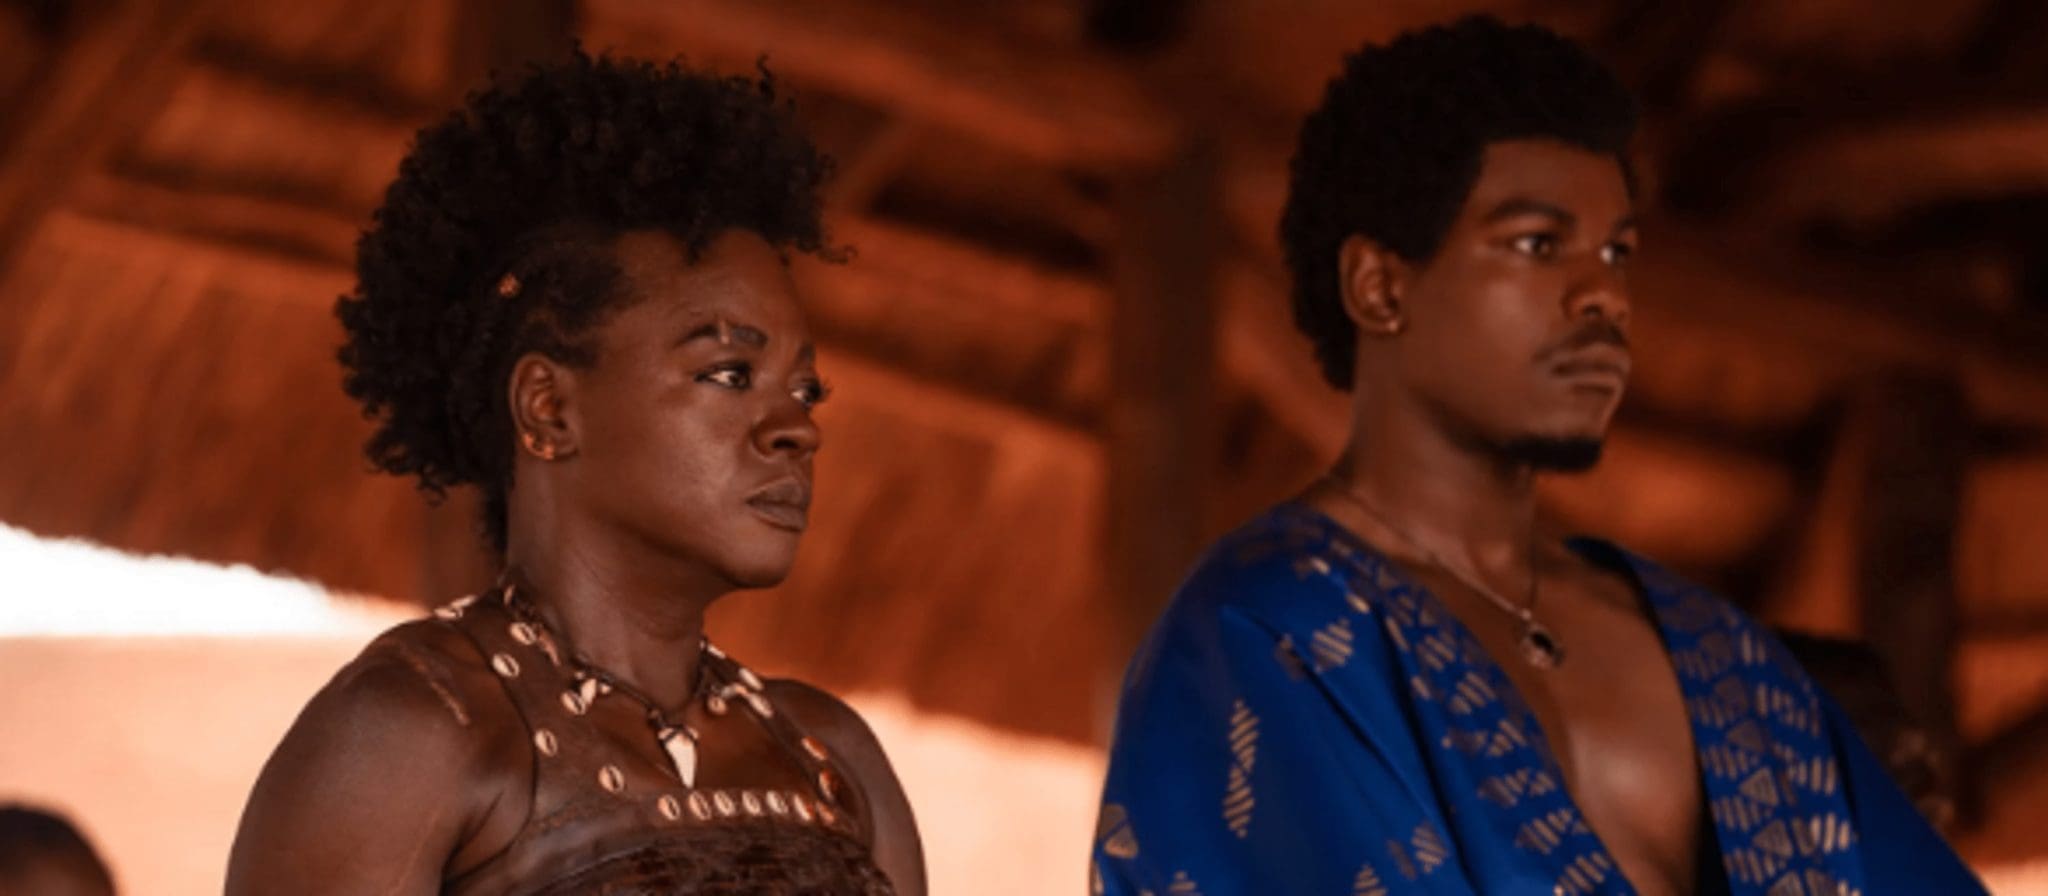 Oscar-winning Viola Davis will lead a fearless African female combat squad into battle in the new film The Woman King